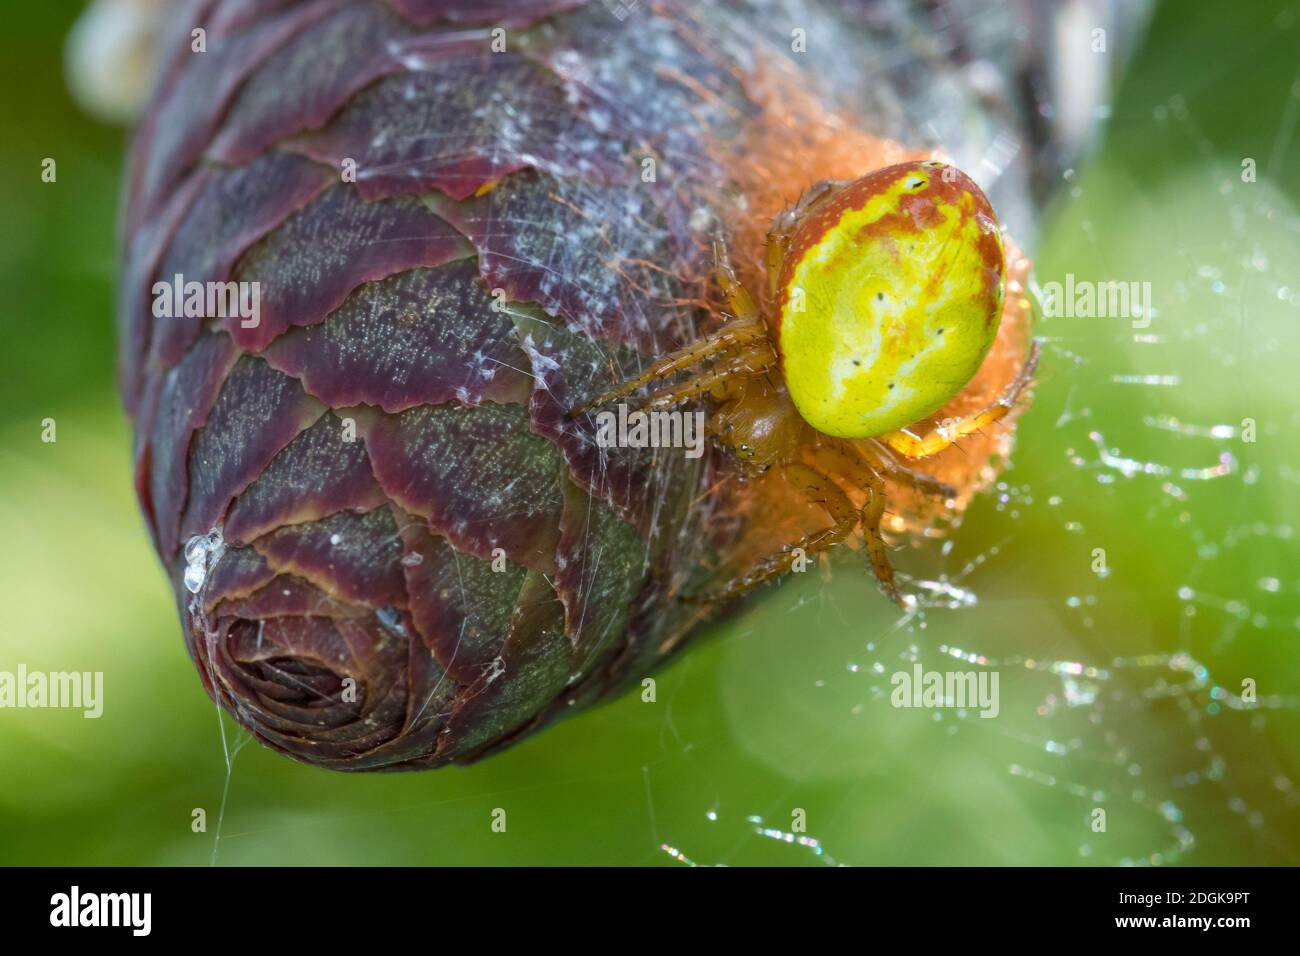 Spinnen Kokon High Resolution Stock Photography and Images - Alamy